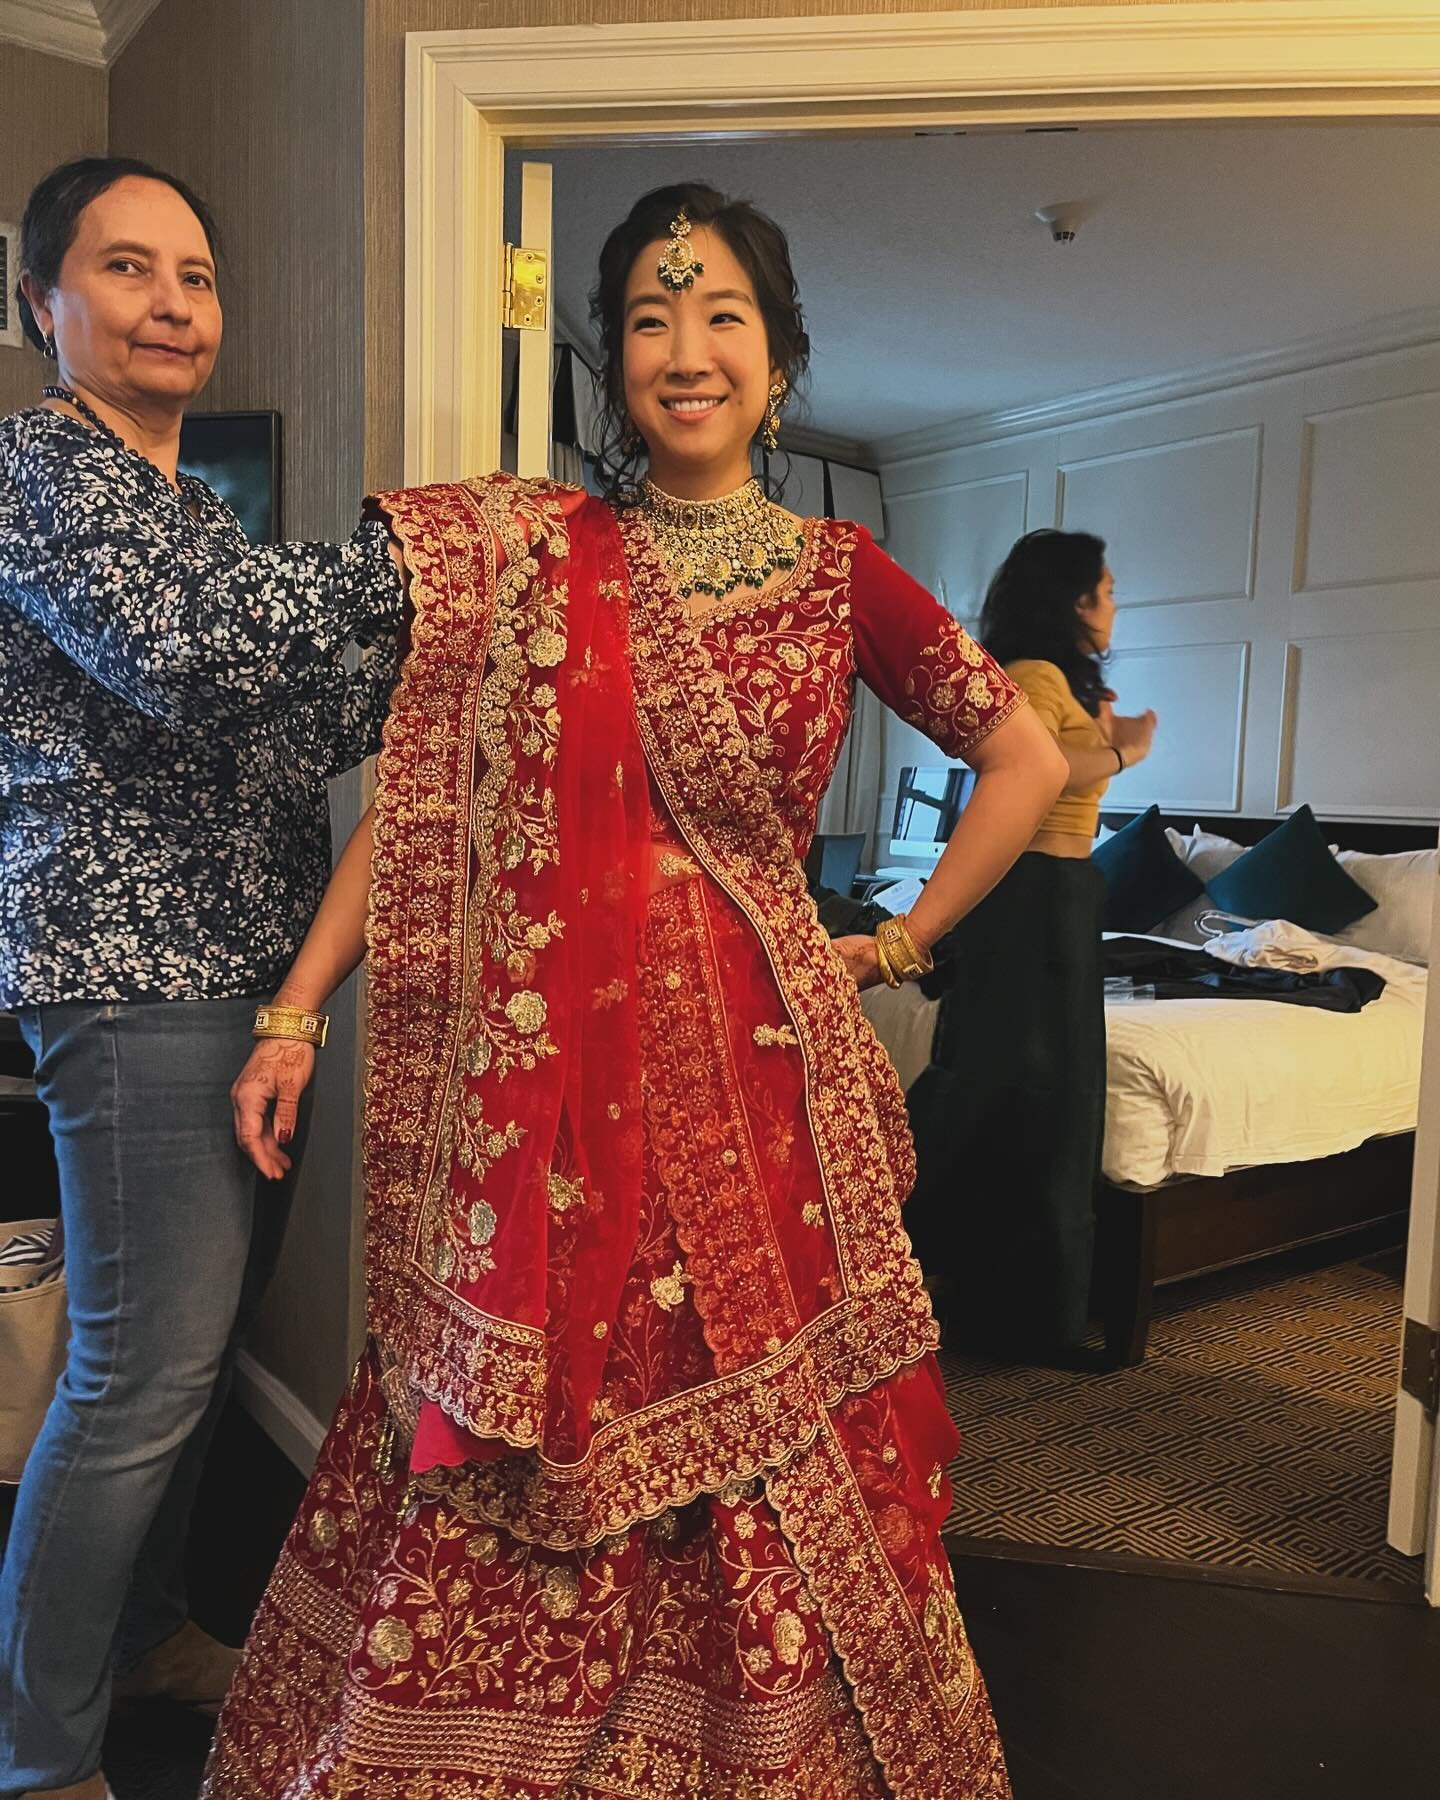 Some shots of us getting ready as two clans came together to celebrate @sereebee and @souvikpaul89 &lsquo;s wedding this weekend. The outfits, the company, and the dancing were all on point.